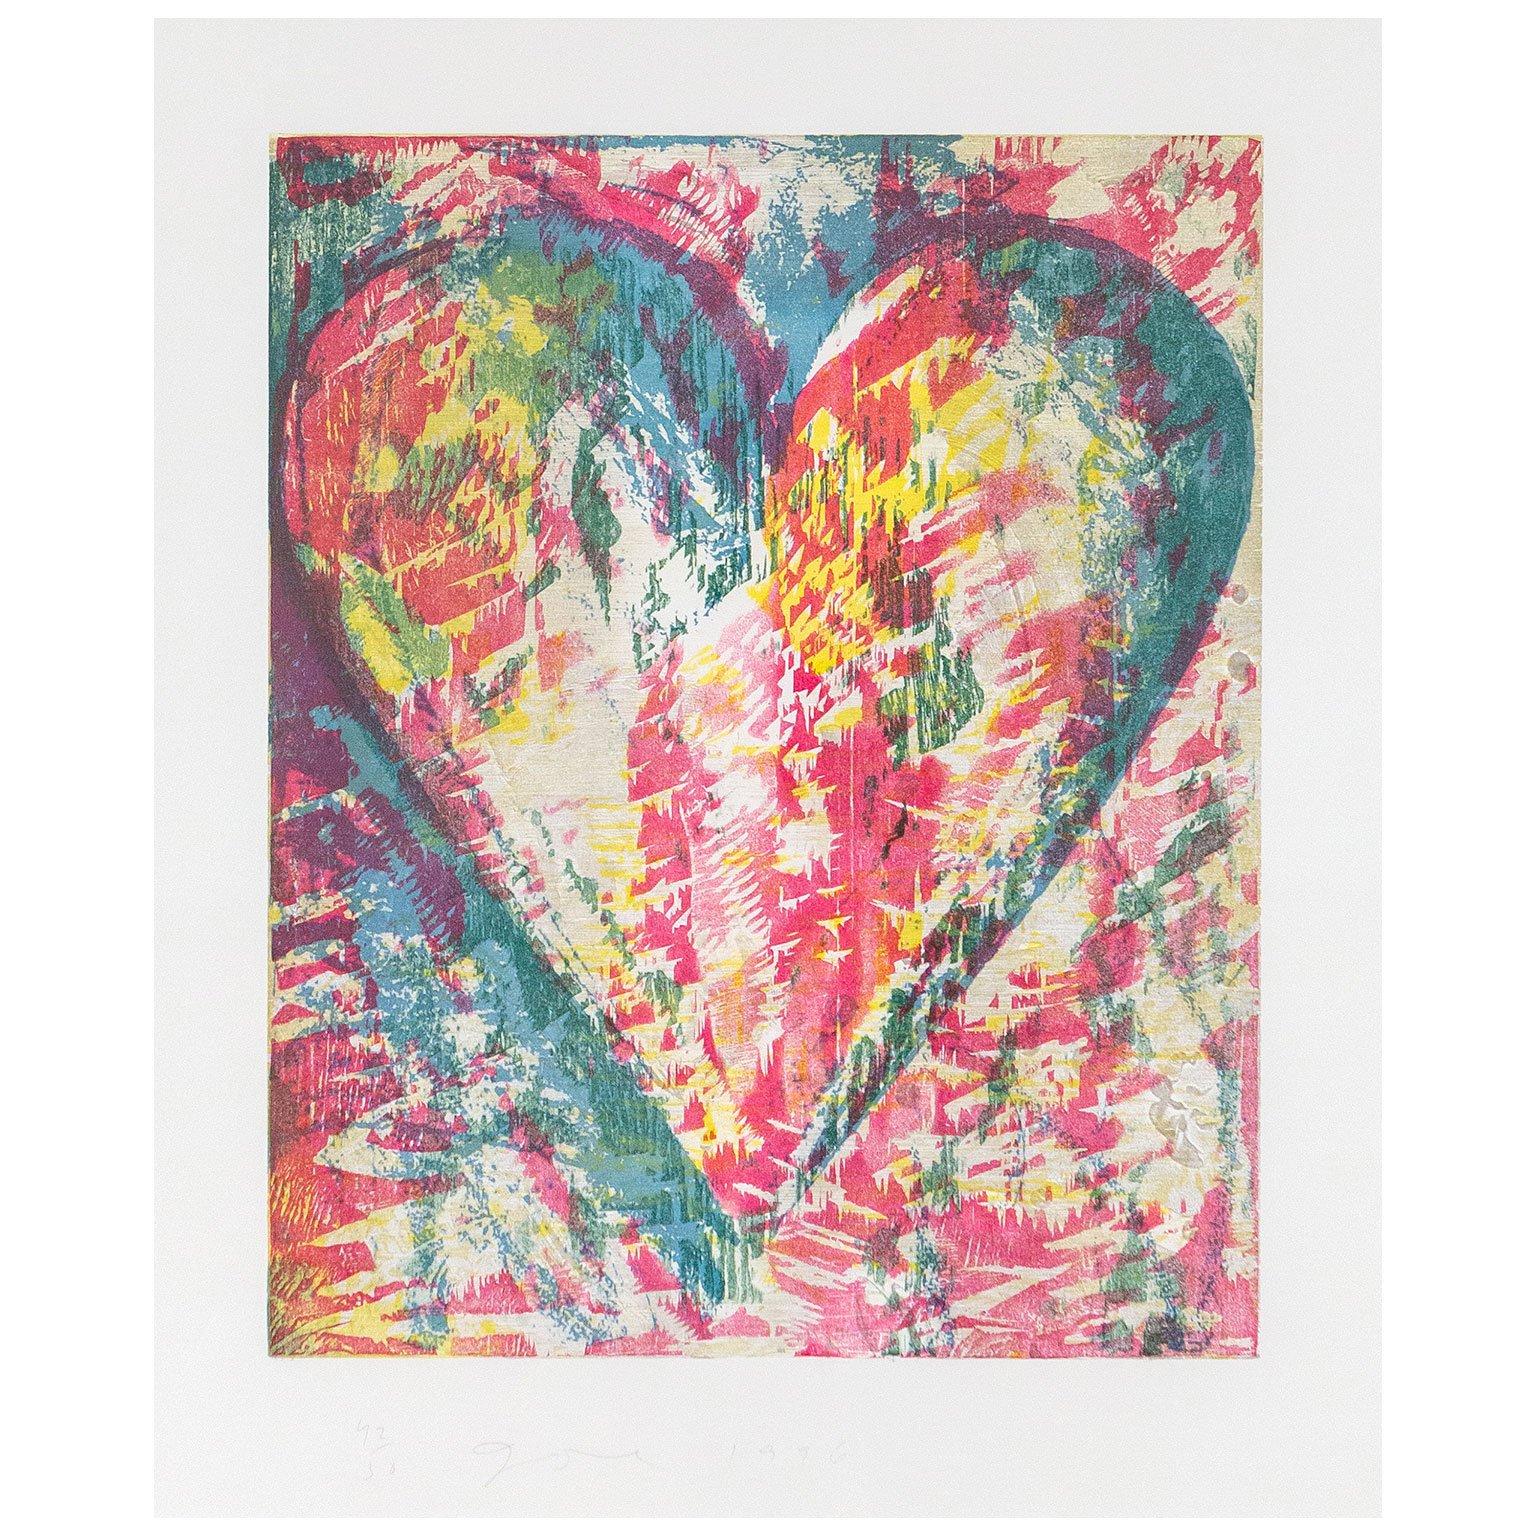 Jim Dine (b. 1935) was one of the original artists that defined Pop Art in the 1960’s and redirected American art away from abstraction by including depictions of objects and items from daily life. 

Like Jasper Johns and Andy Warhol, Dine embraced